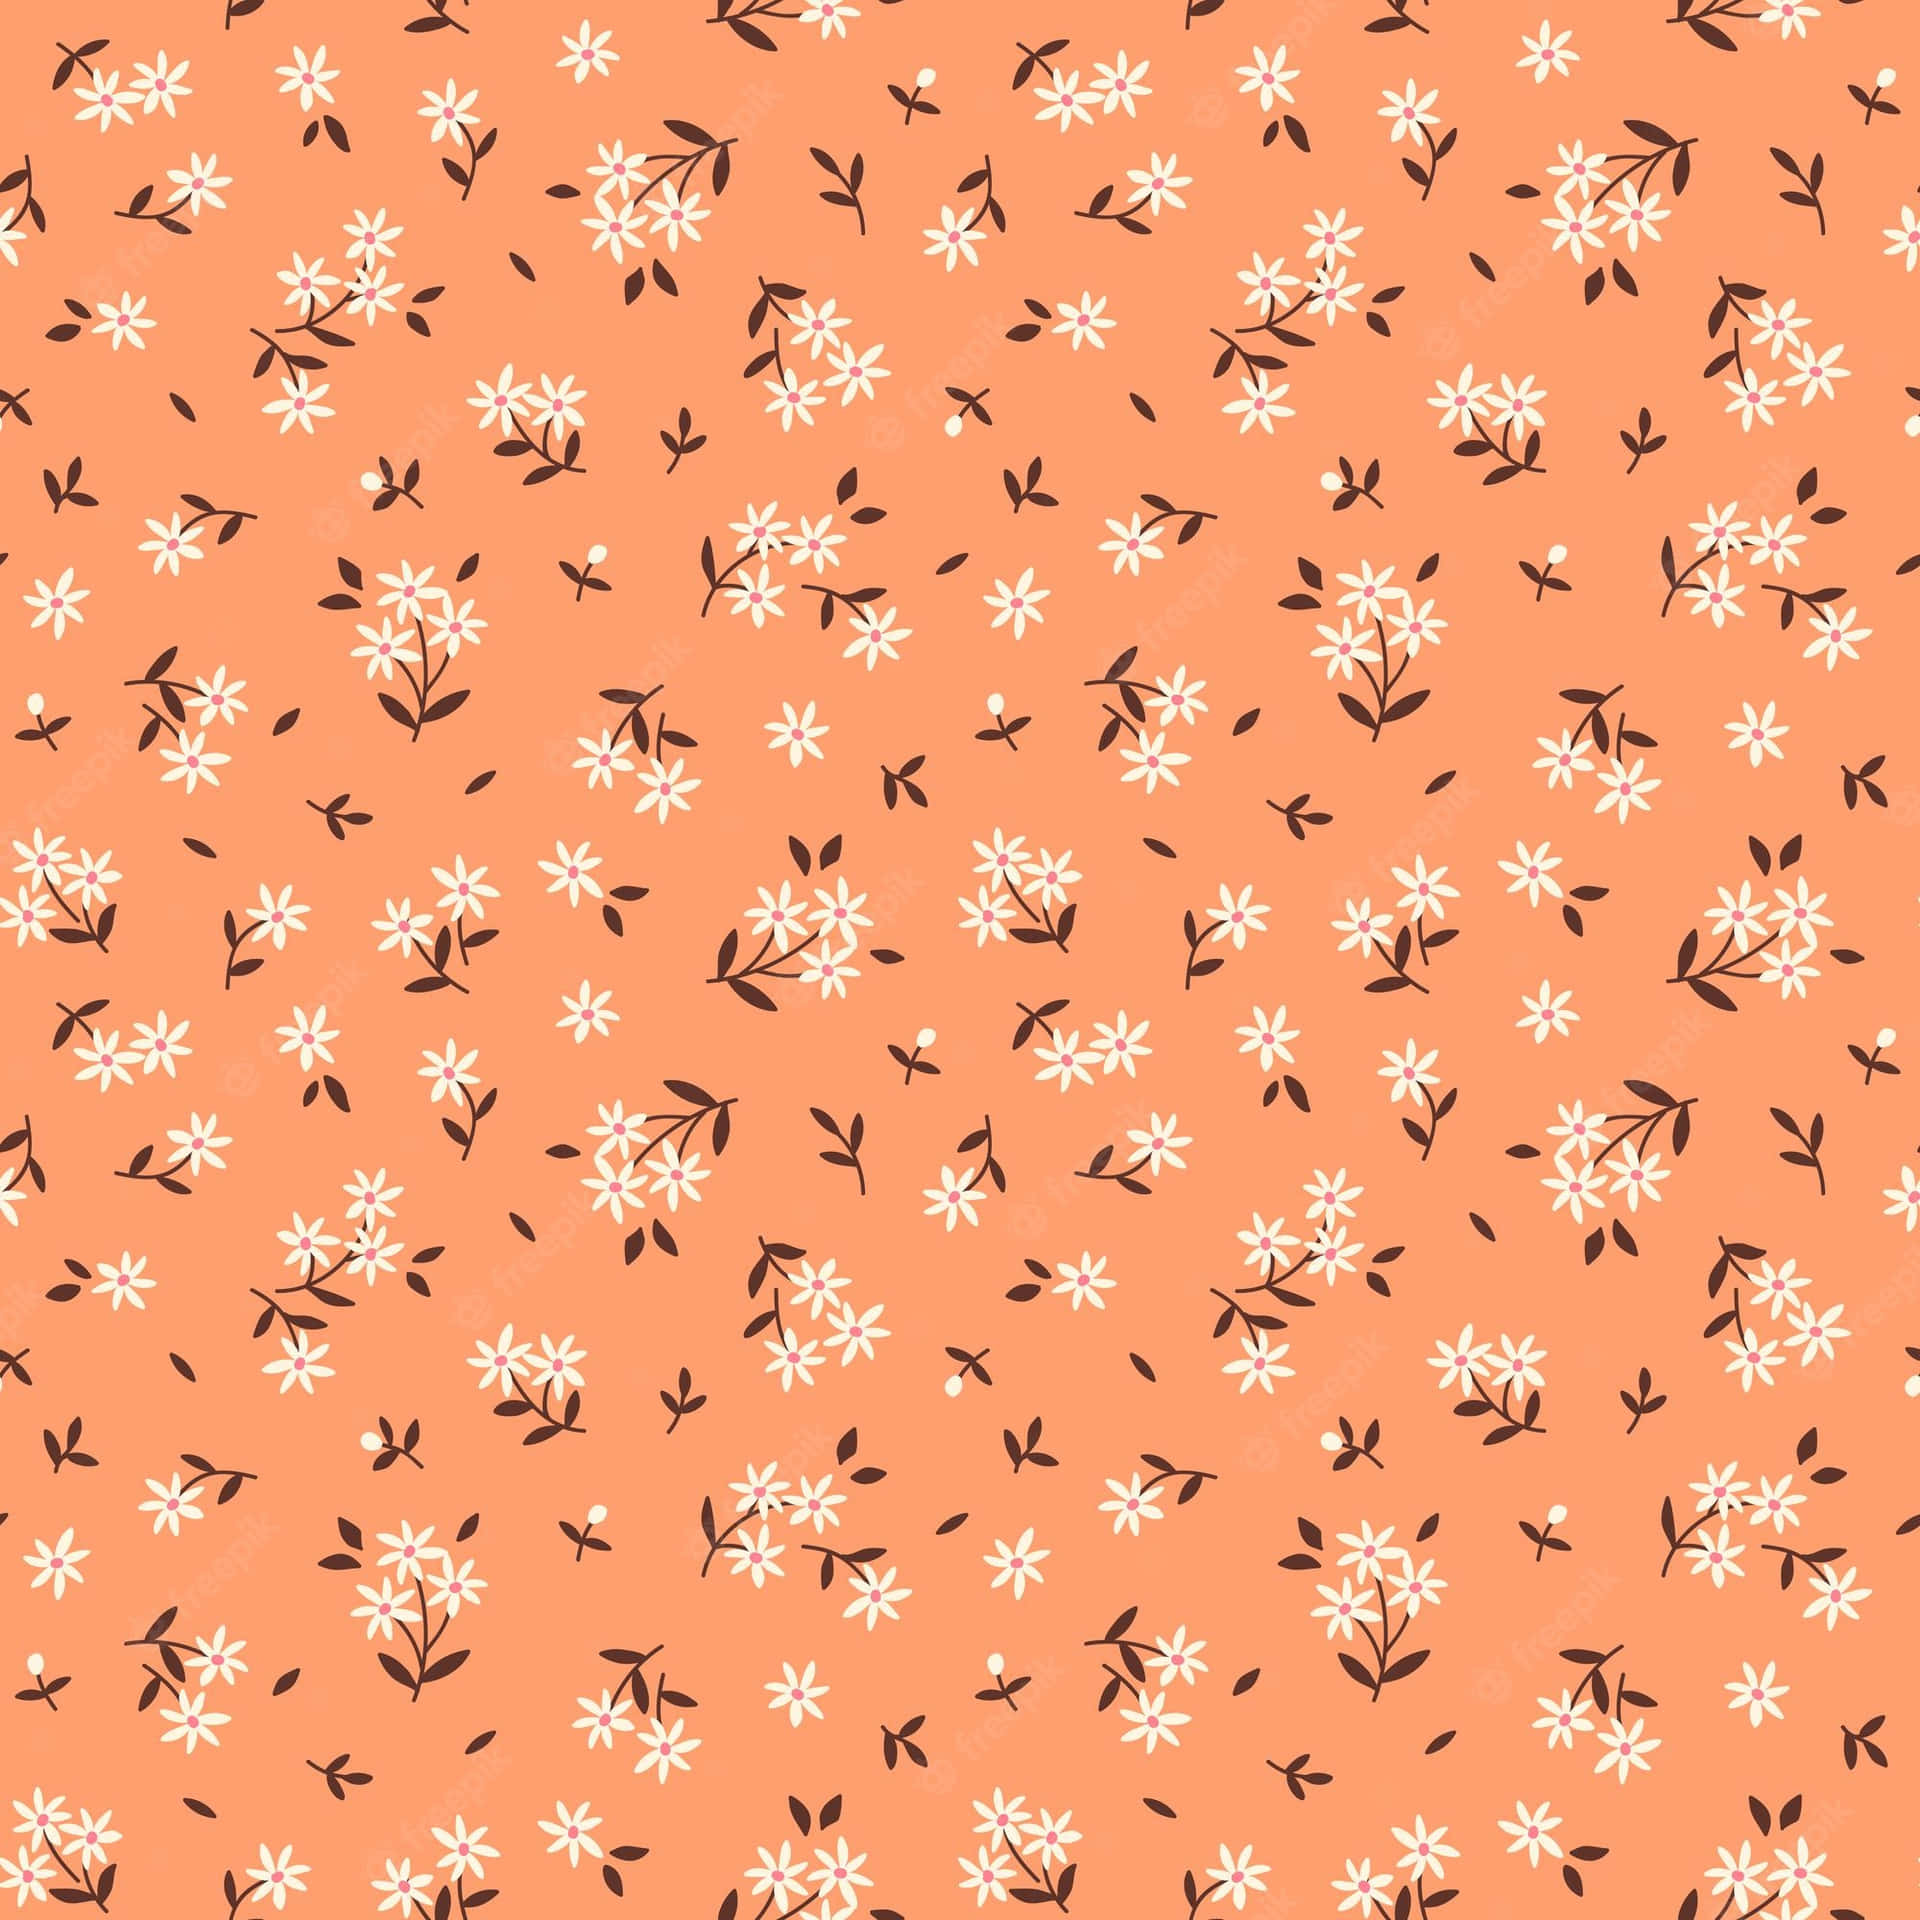 Adorable bright orange background with abstract patterns